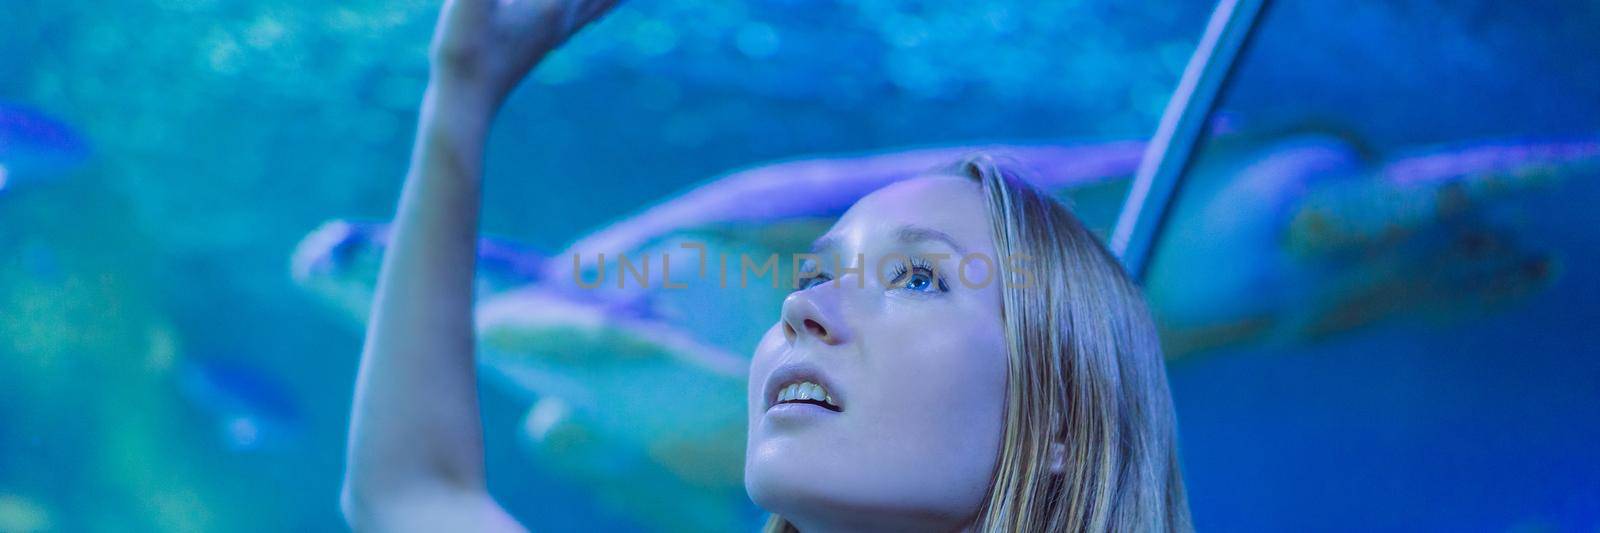 Young woman touches a stingray fish in an oceanarium tunnel. BANNER, LONG FORMAT